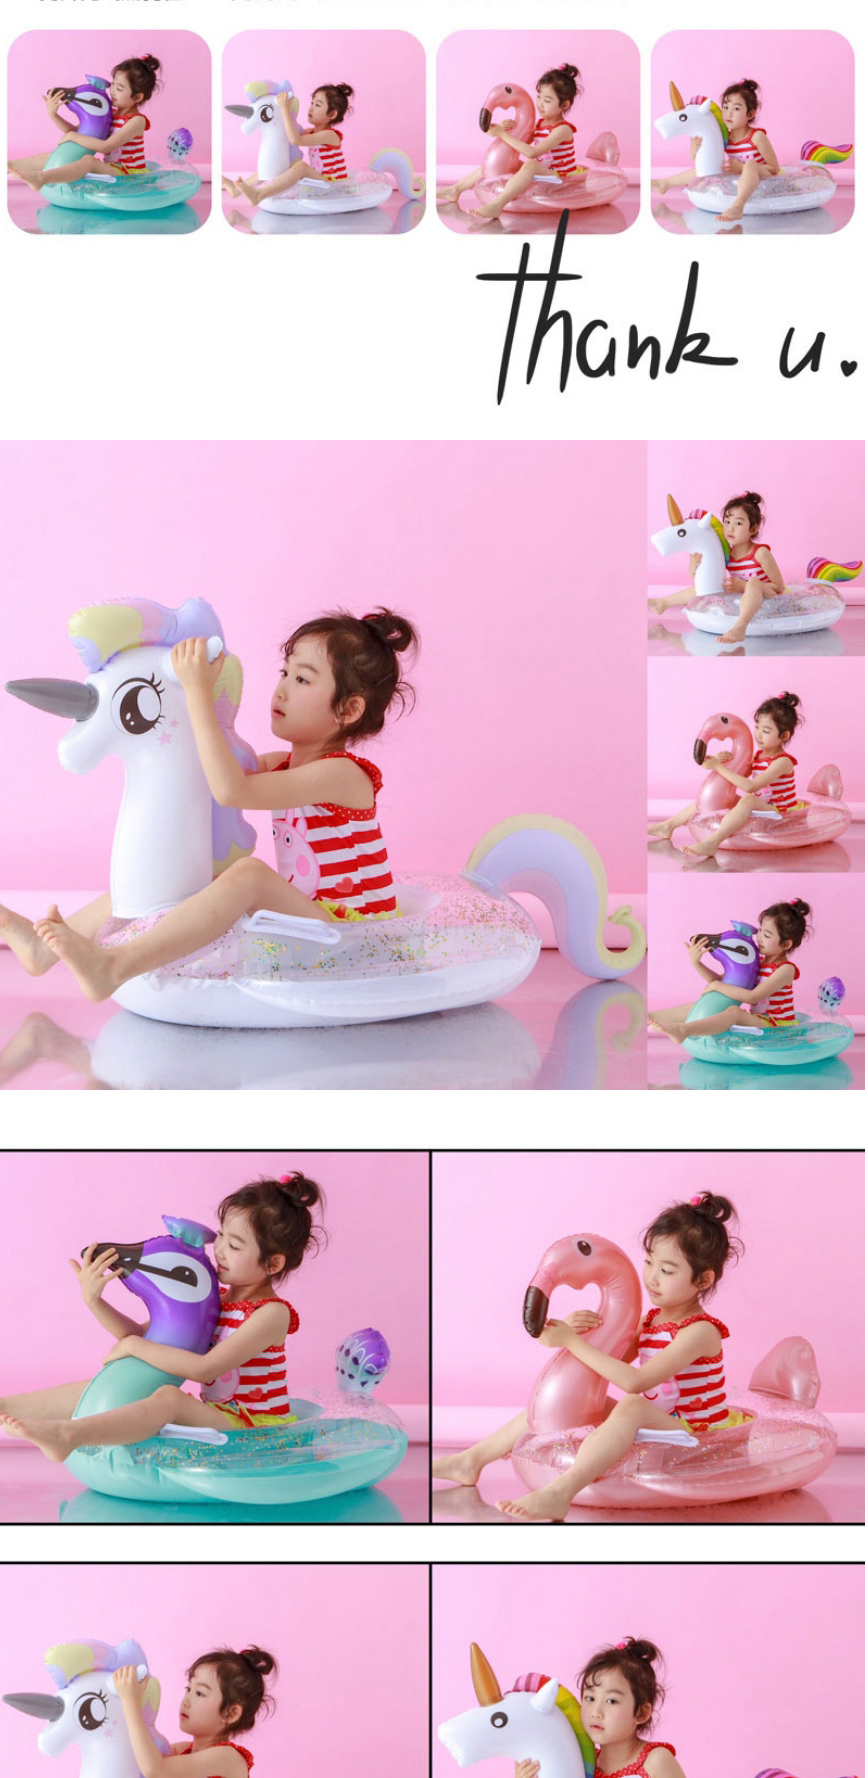 Fashion Sequined Inflatable Bottom Peacock Sequined Inflatable Bottom Boat Flamingo Unicorn Peacock Horse Bubble Bottom Child Seat,Swim Rings